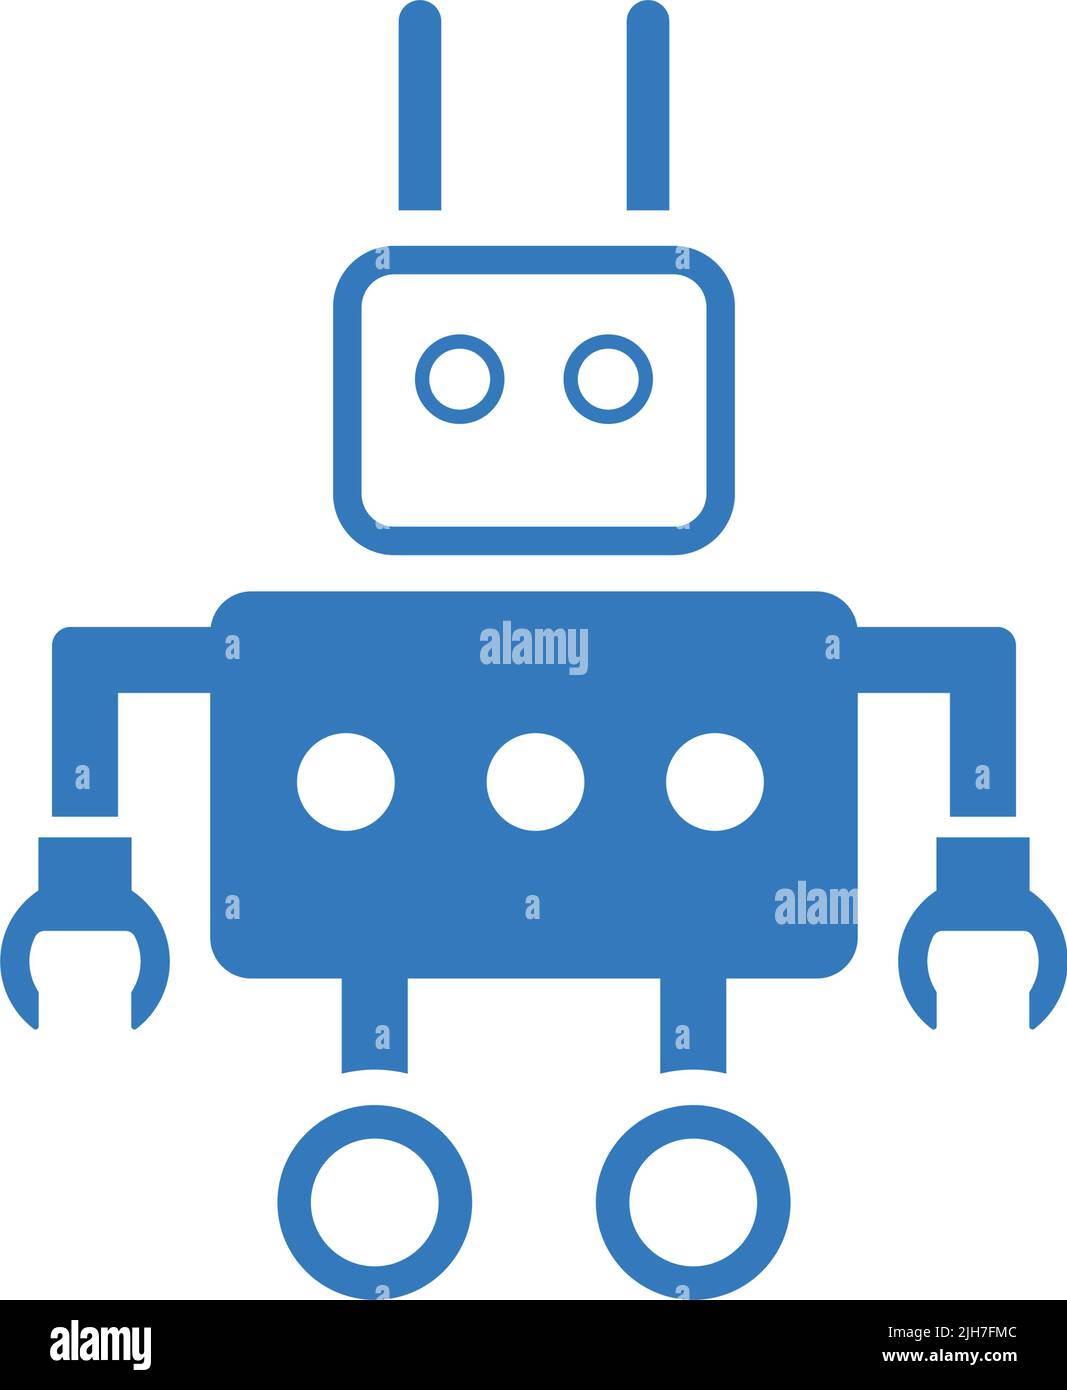 Robot, home, assistant icon - Use for commercial purposes, print media, web or any type of design projects. Vector EPS file. Stock Vector